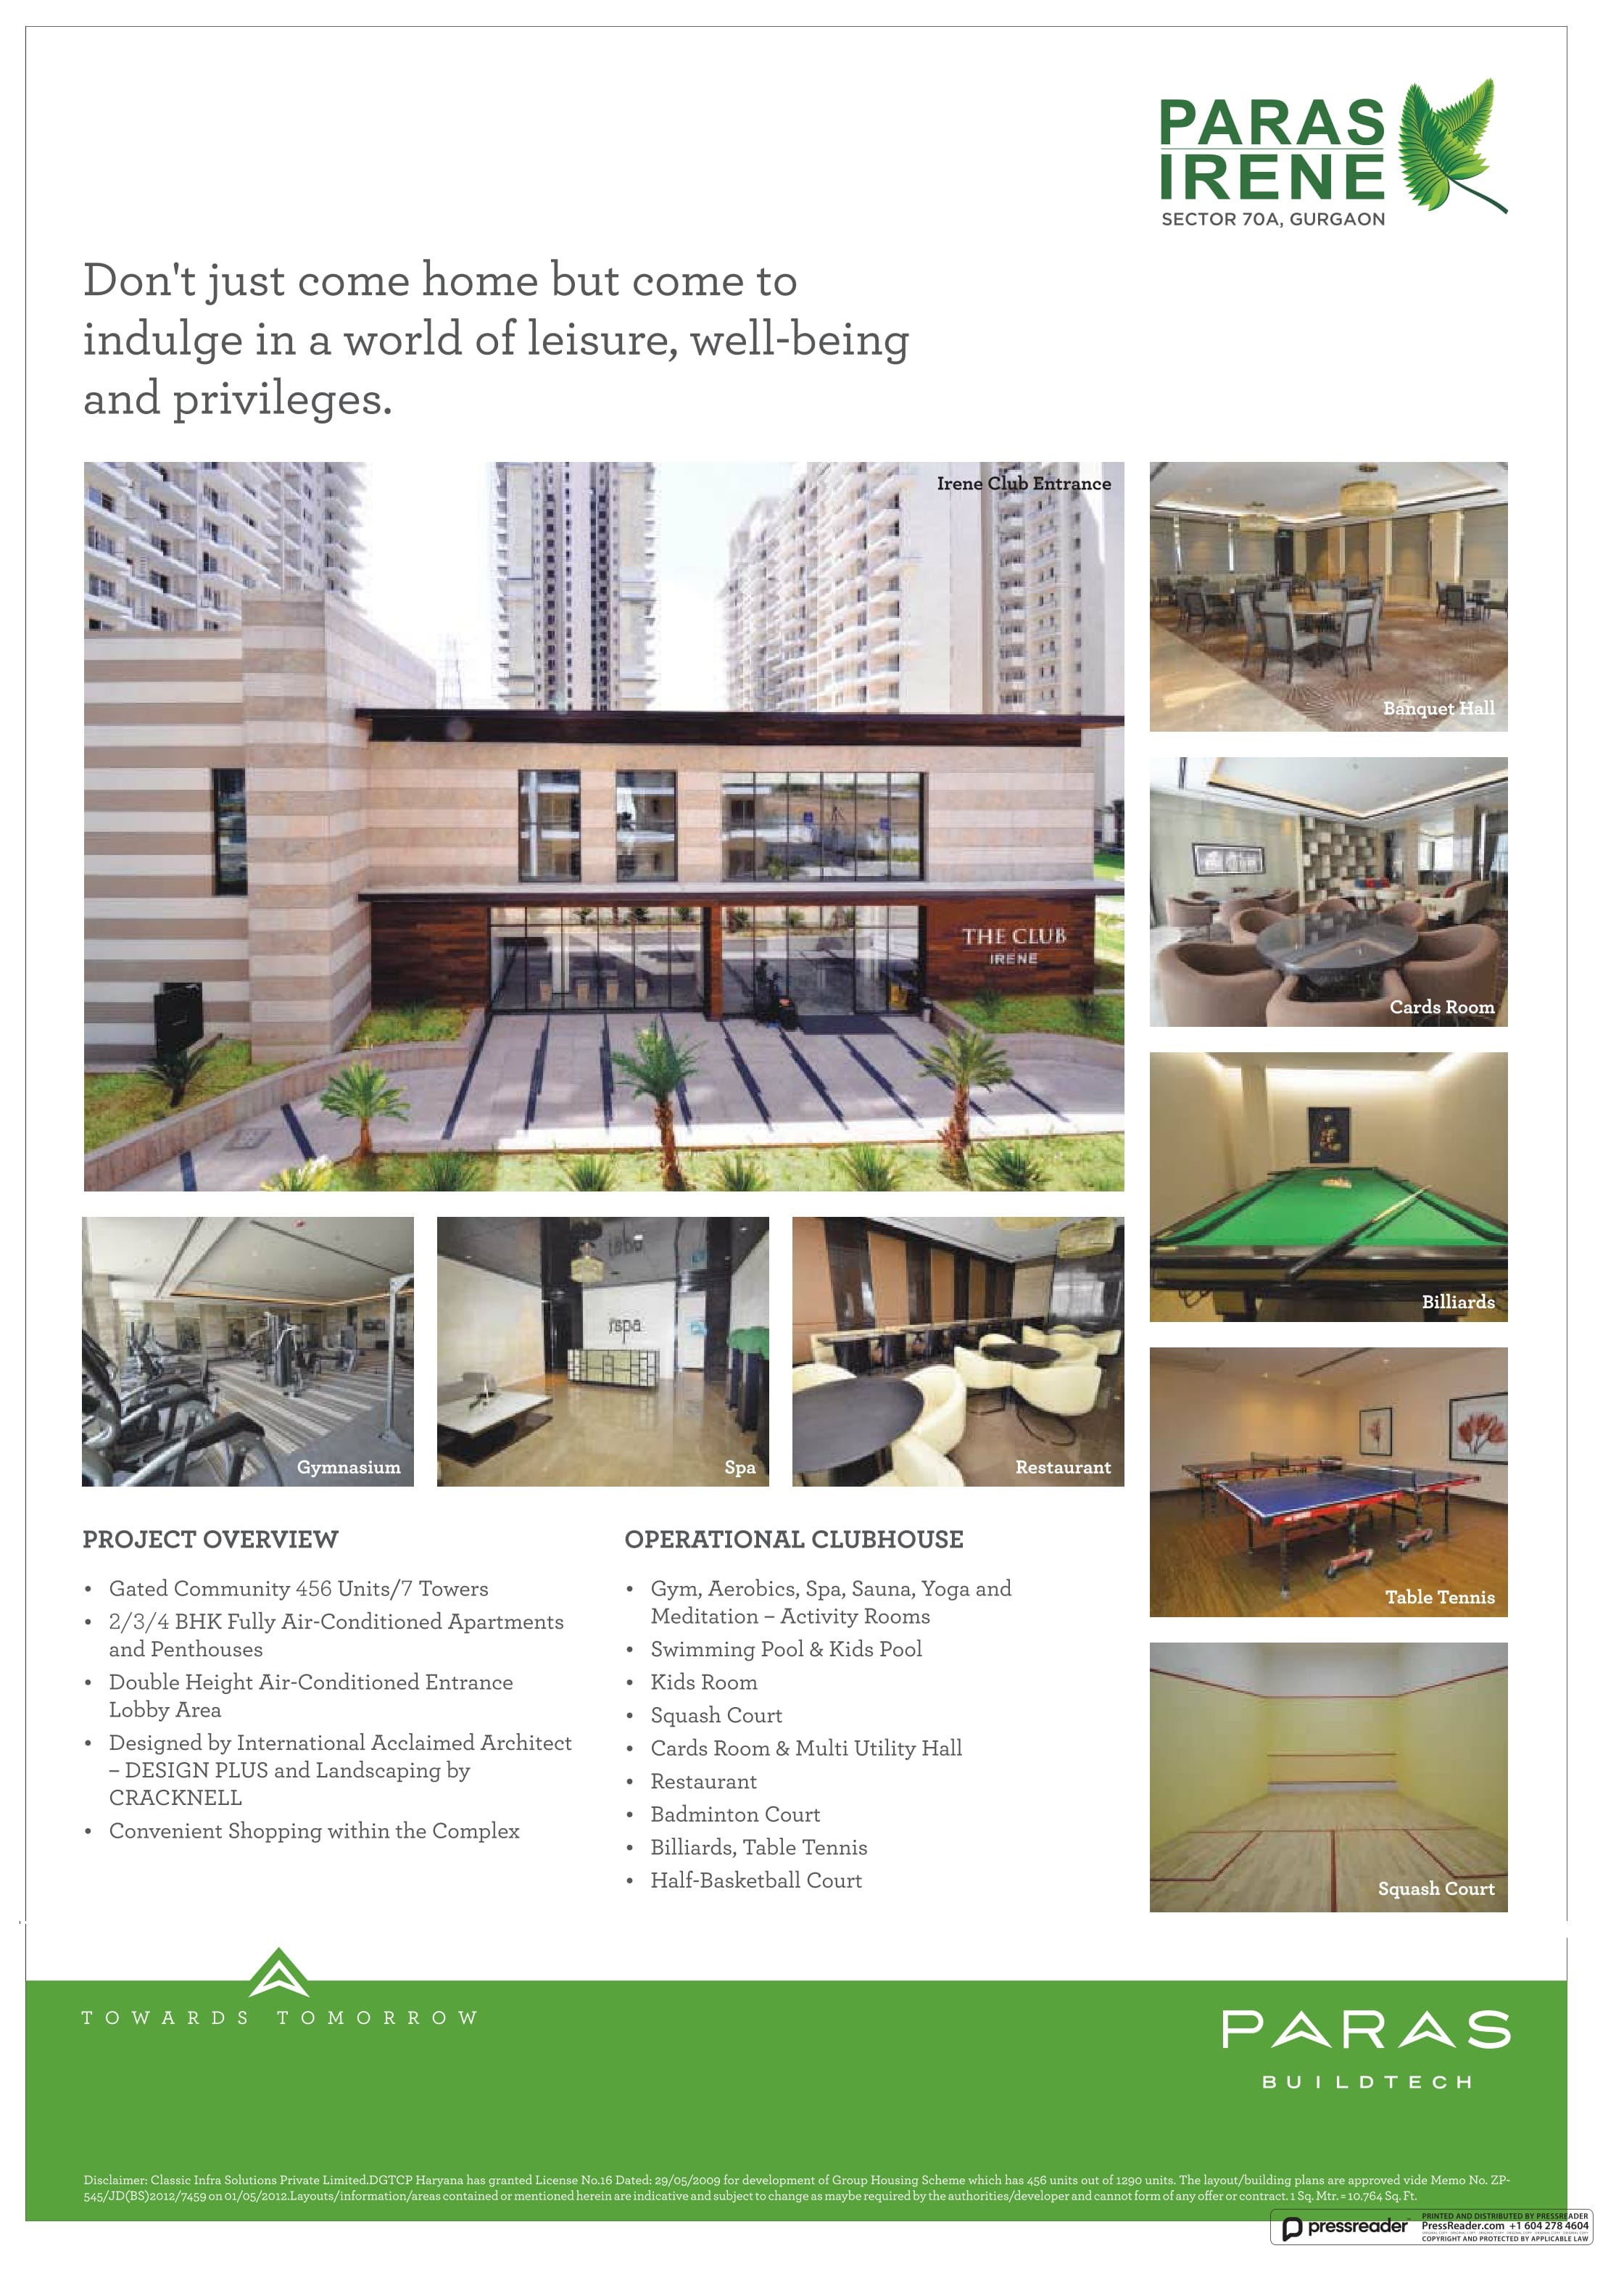 Don't just come home but come indulge in a world of liesure, well being and privileges at Paras Irene in Gurgaon Update